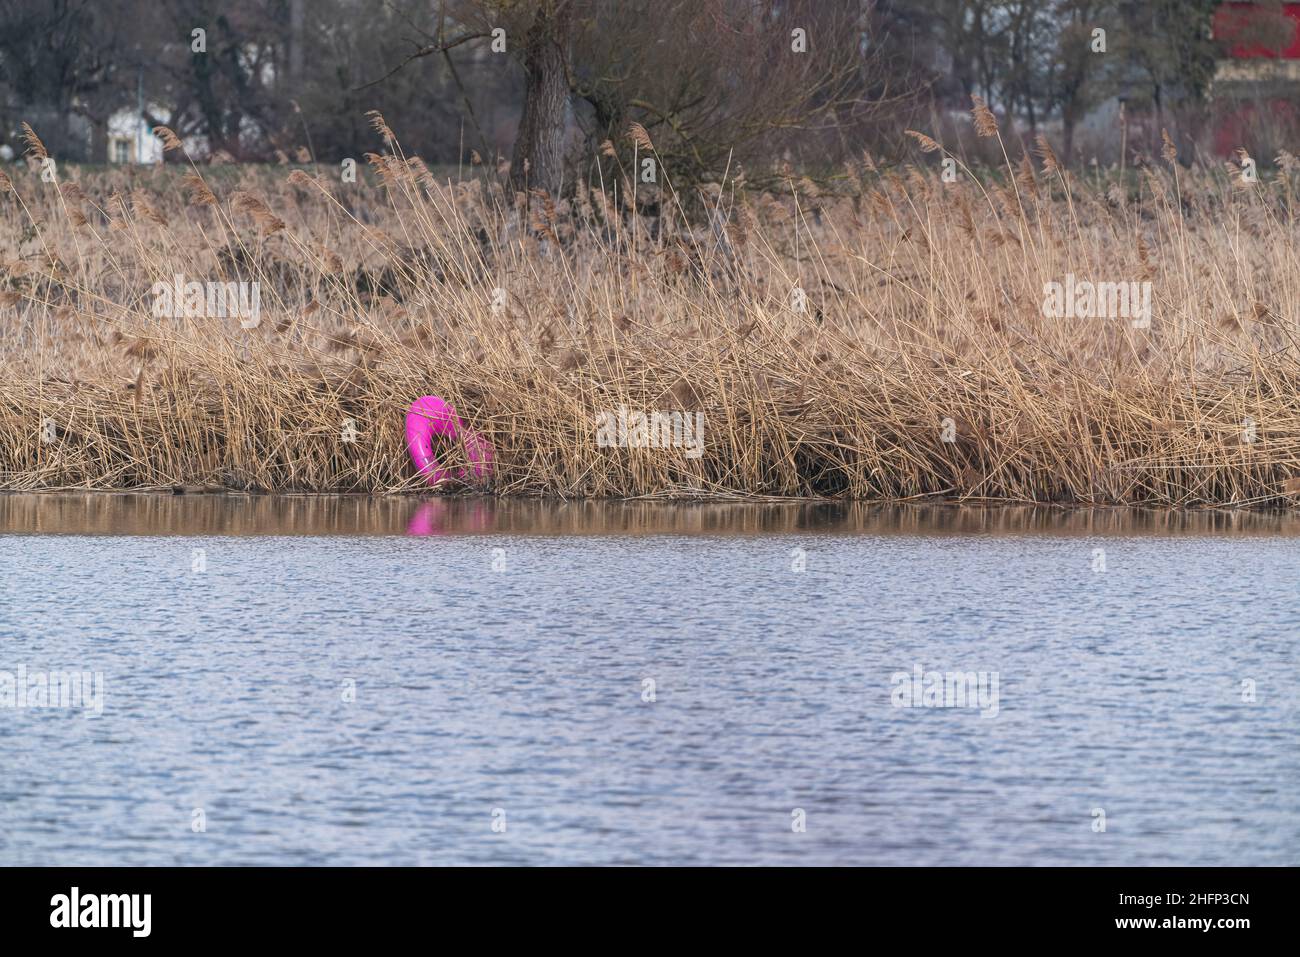 An inflatable pink heart-shaped water toy. Caught in the reeds of a lake and now lying around as waste that pollutes nature. Stock Photo